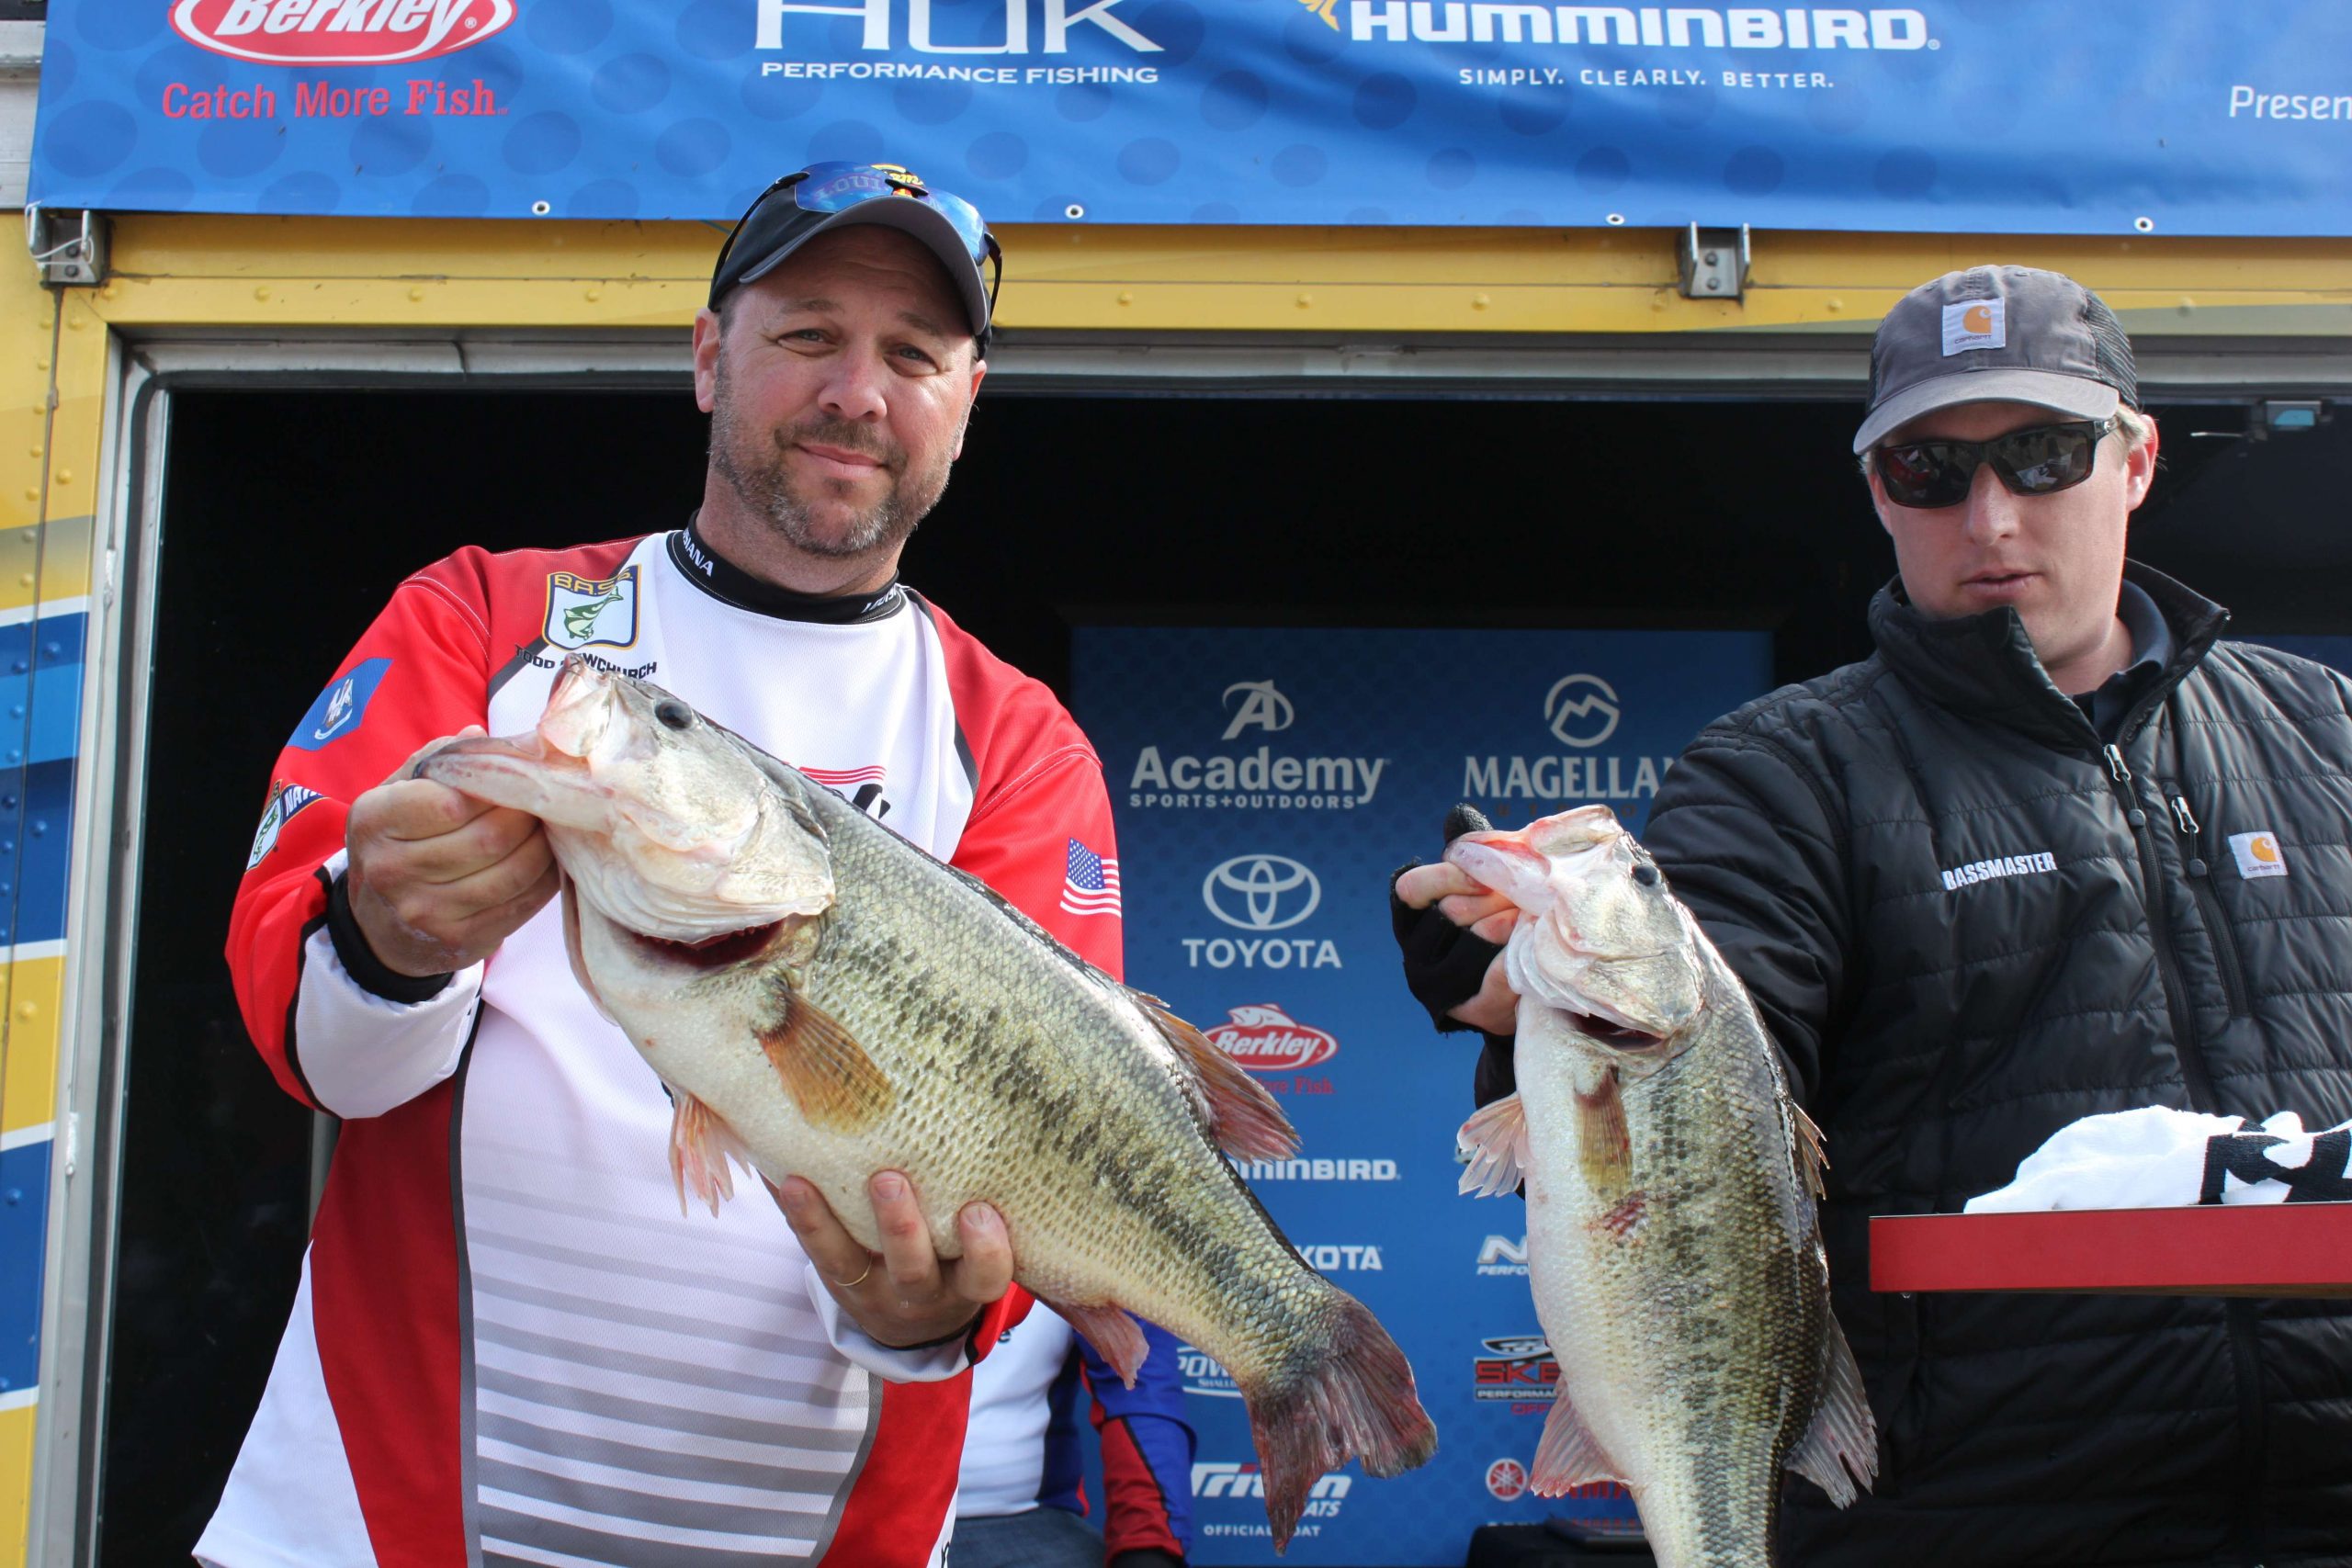 And as promised, thereâs Todd Newchurch again. He caught a three-bass limit on Friday that weighed 17-2. 